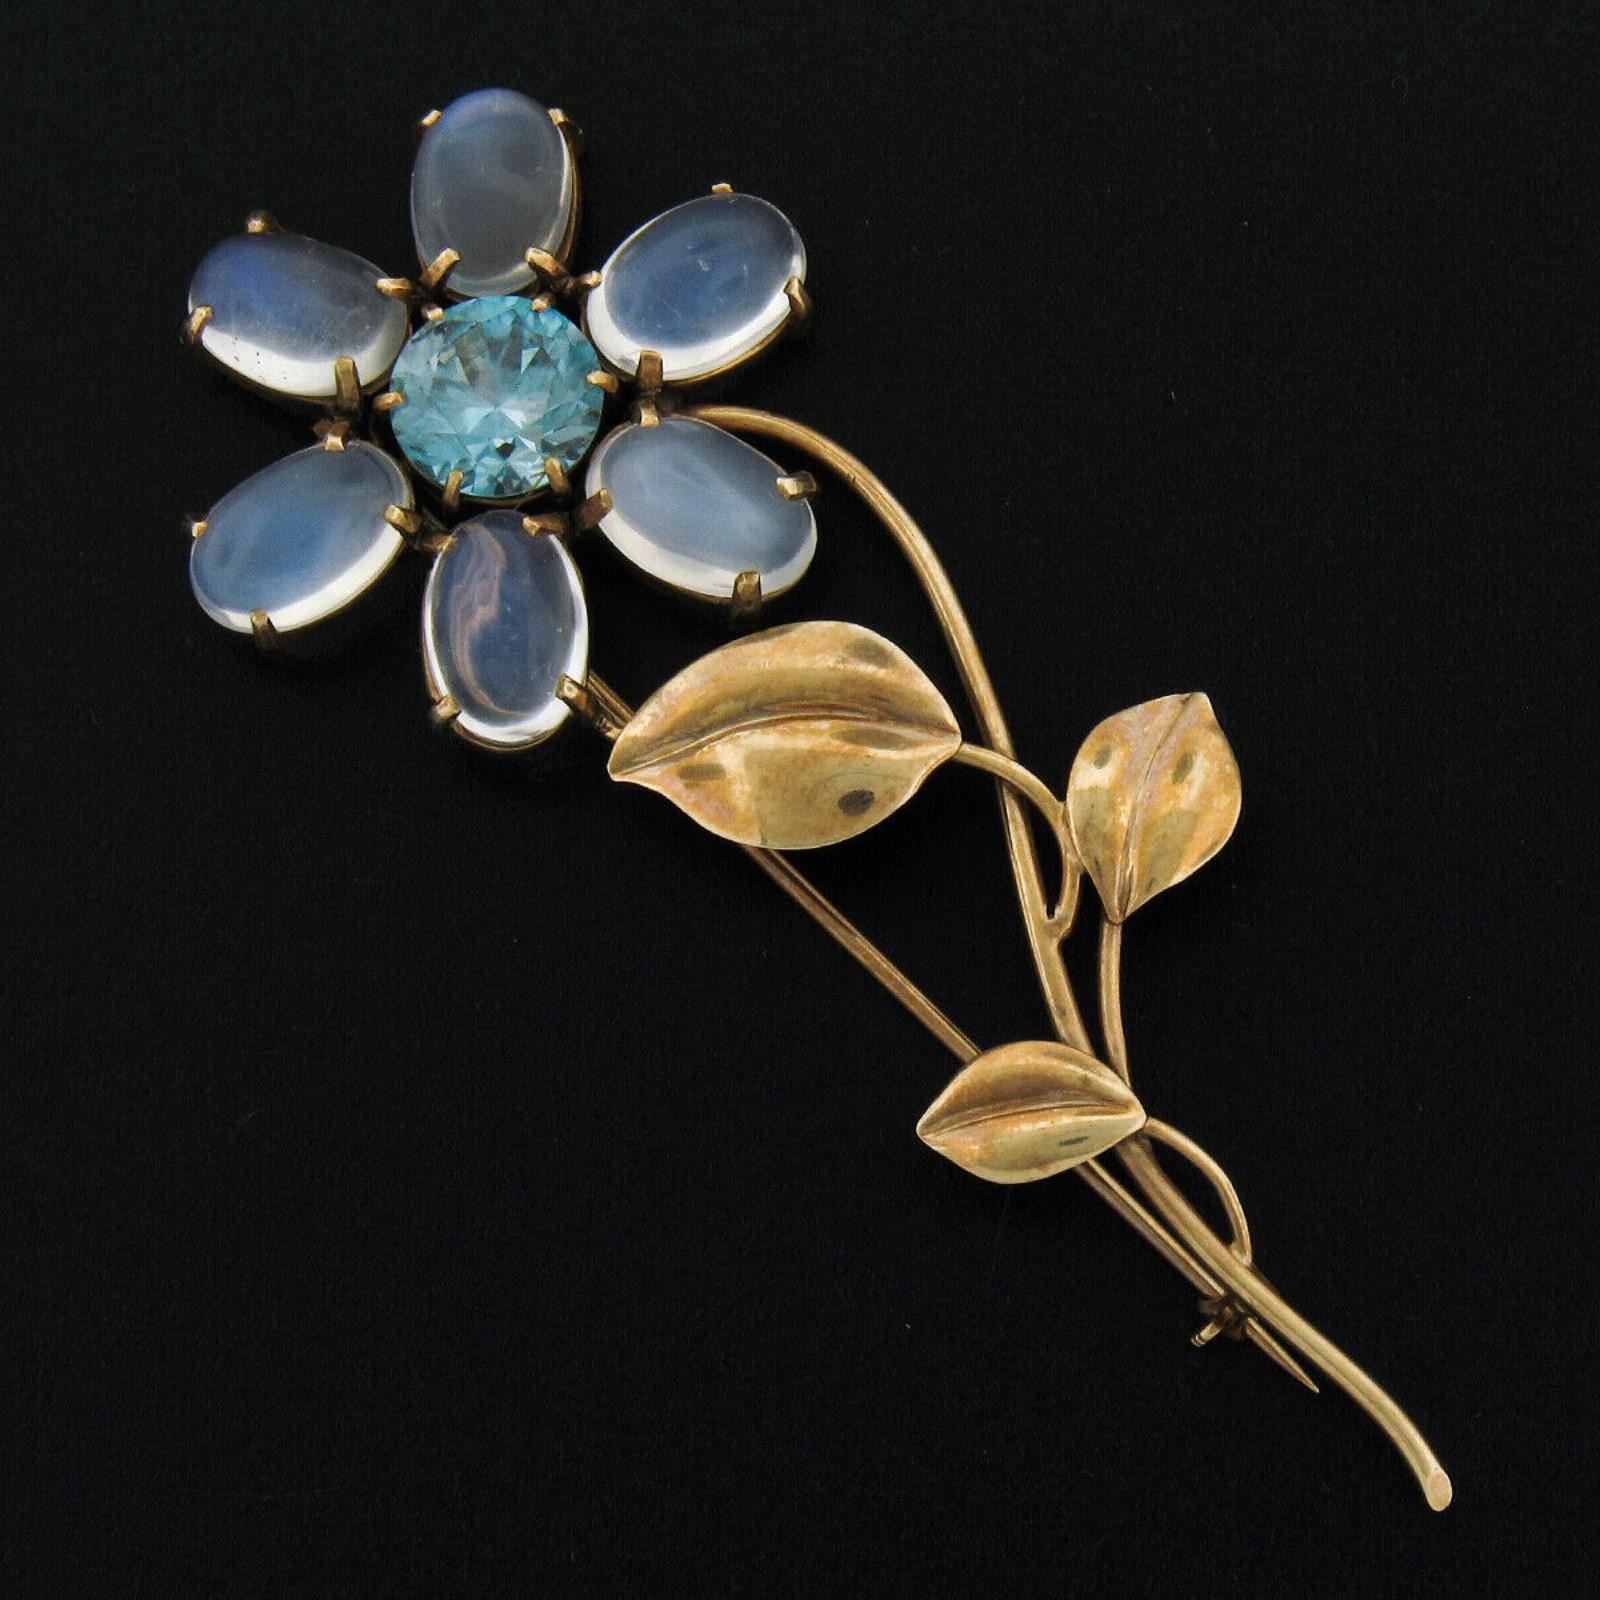 This elegant retro vintage brooch is crafted in solid 14k yellow gold and features a jaw-dropping round cut blue zircon which displays a very attractive and vivid blue color. It is prong set at the center of the flower design and is then surrounded